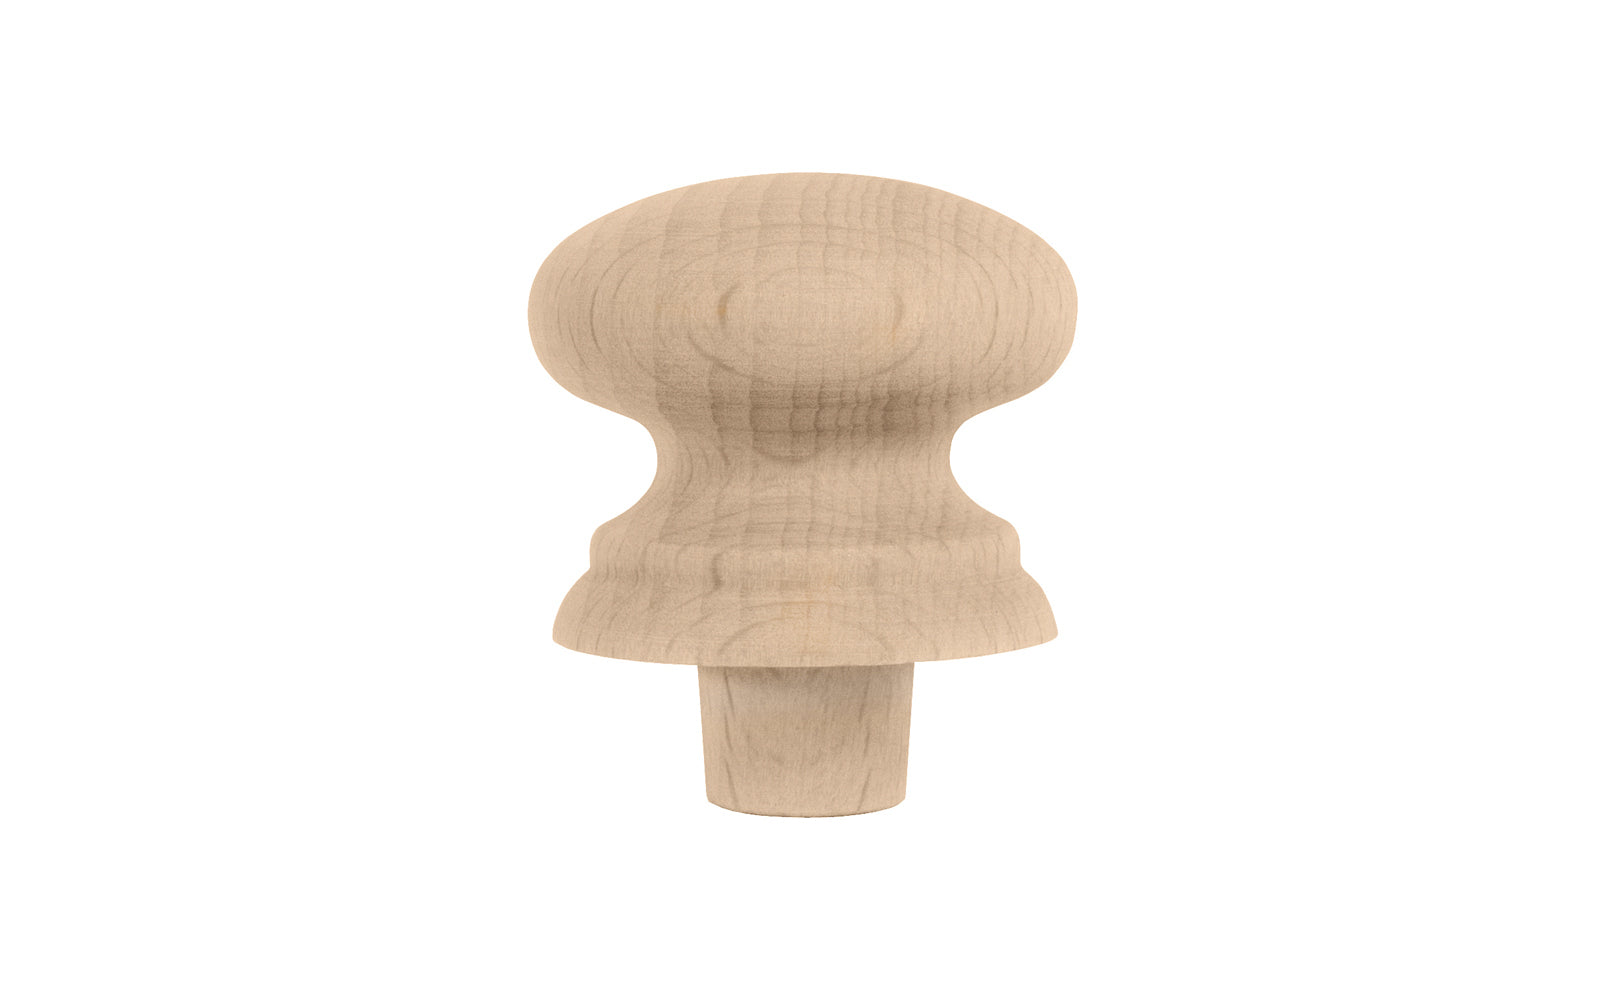 Traditional & Classic Shaker Beech Knob with Tenon. Made of unfinished solid beech wood, these wood knobs have a smooth & attractive look & feel. Wooden shaker knob for cabinets, drawers, & furniture. Old style Beechwood Shaker Knob. Wood Shaker Cabinet Knob. 1-3/8